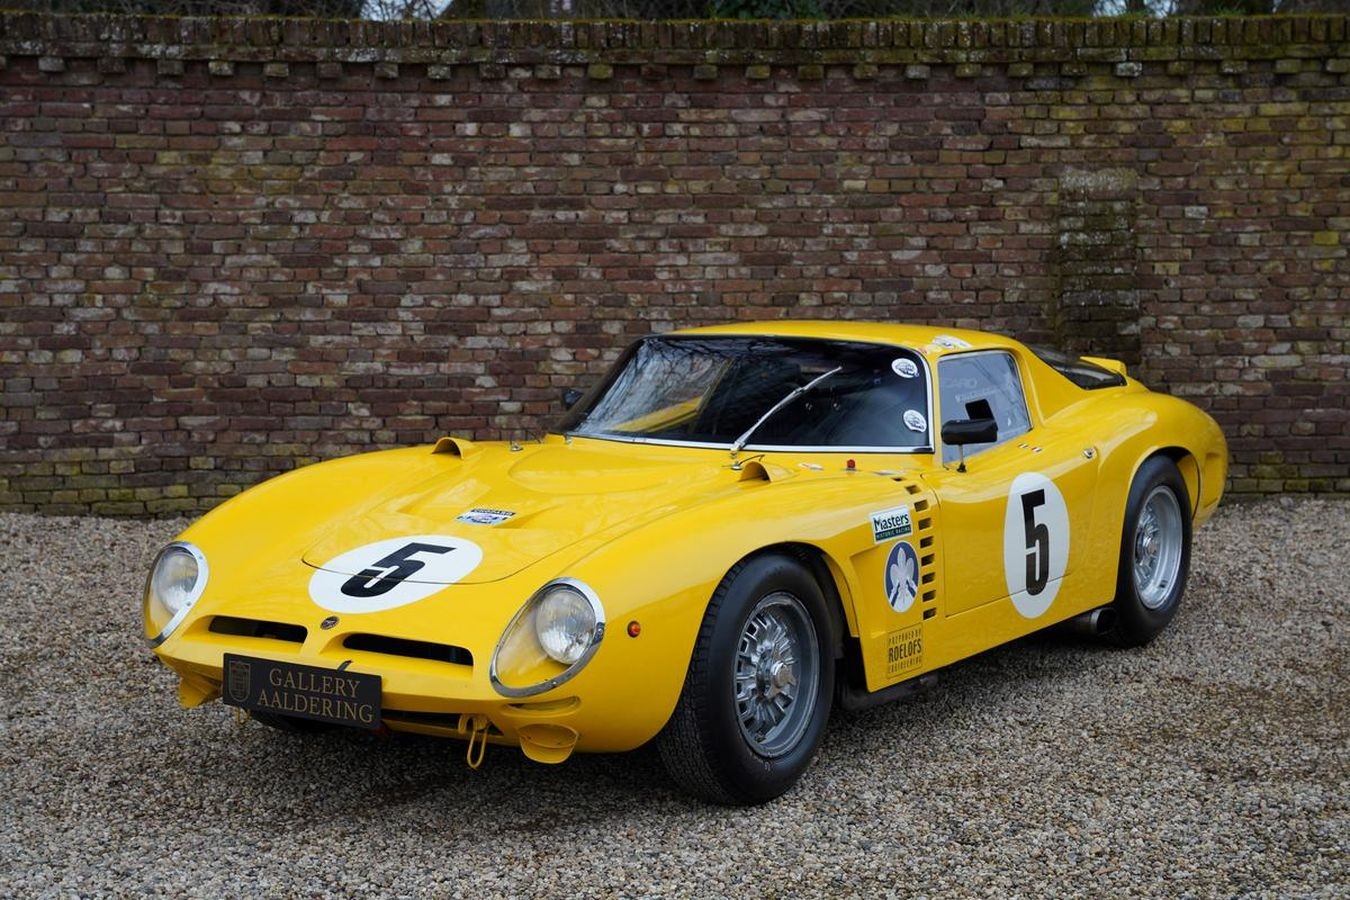 Spring has Sprung! Ten Great Vehicles in Seasonal Shades of Yellow